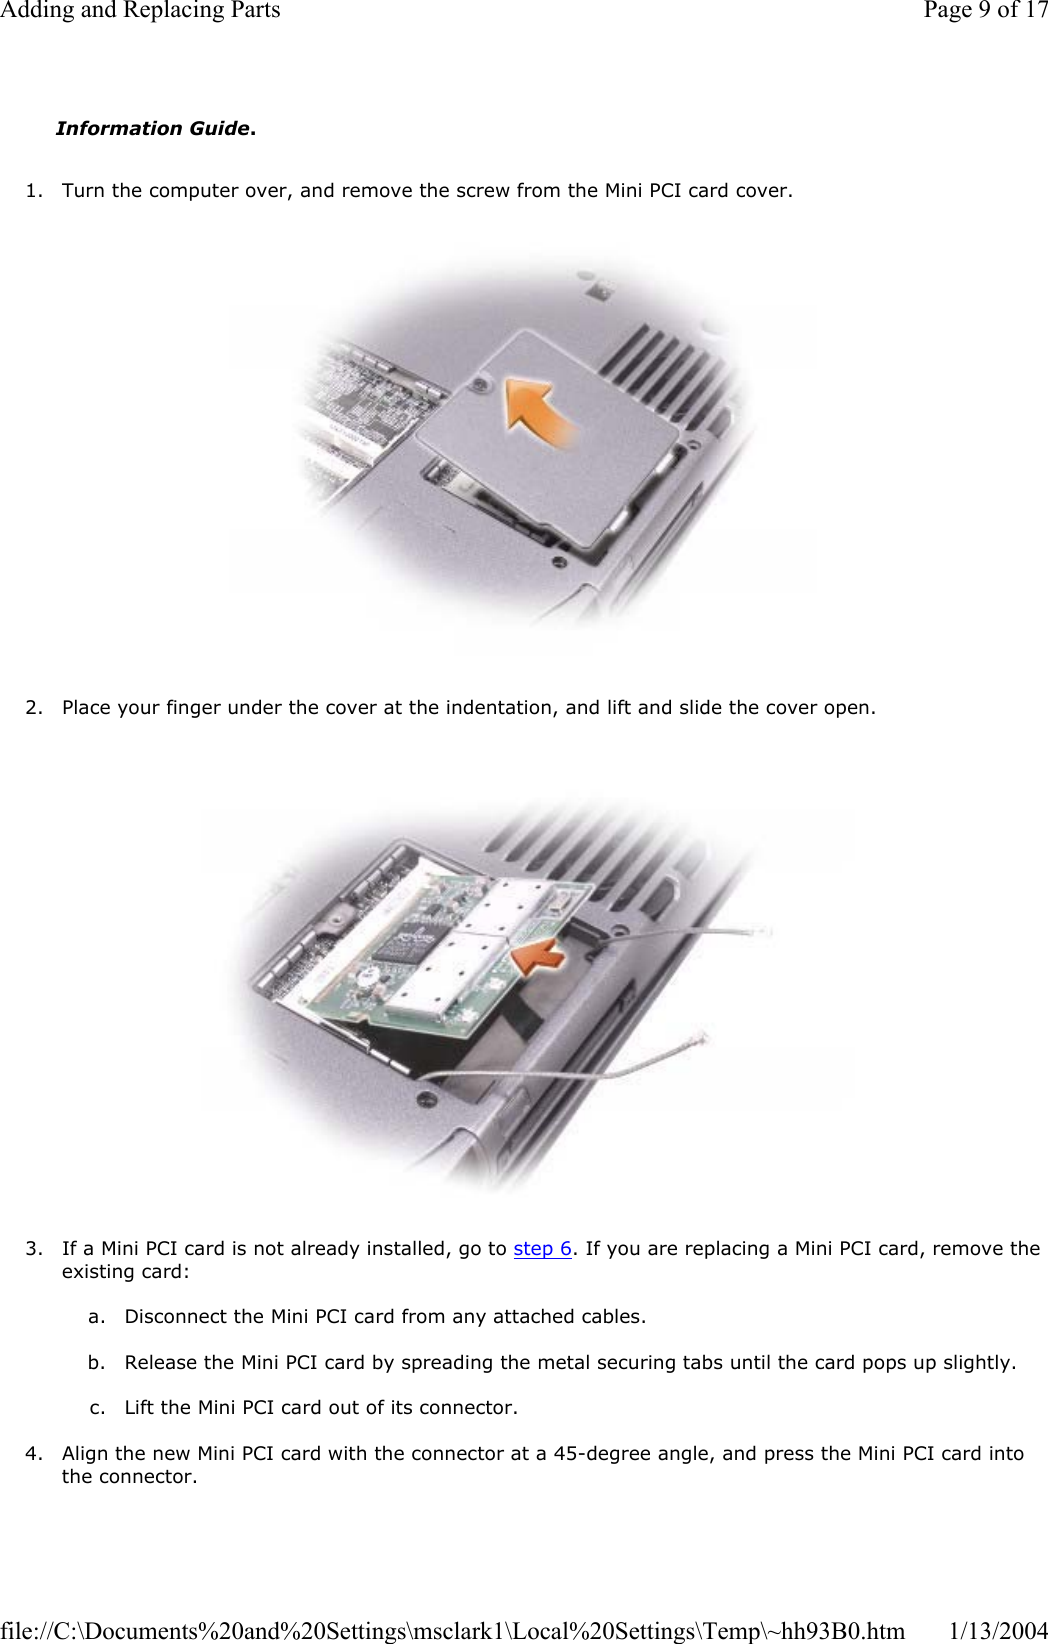 1. Turn the computer over, and remove the screw from the Mini PCI card cover. 2. Place your finger under the cover at the indentation, and lift and slide the cover open. 3. If a Mini PCI card is not already installed, go to step 6. If you are replacing a Mini PCI card, remove the existing card: a. Disconnect the Mini PCI card from any attached cables.  b. Release the Mini PCI card by spreading the metal securing tabs until the card pops up slightly. c. Lift the Mini PCI card out of its connector. 4. Align the new Mini PCI card with the connector at a 45-degree angle, and press the Mini PCI card into the connector. Information Guide.Page 9 of 17Adding and Replacing Parts1/13/2004file://C:\Documents%20and%20Settings\msclark1\Local%20Settings\Temp\~hh93B0.htm